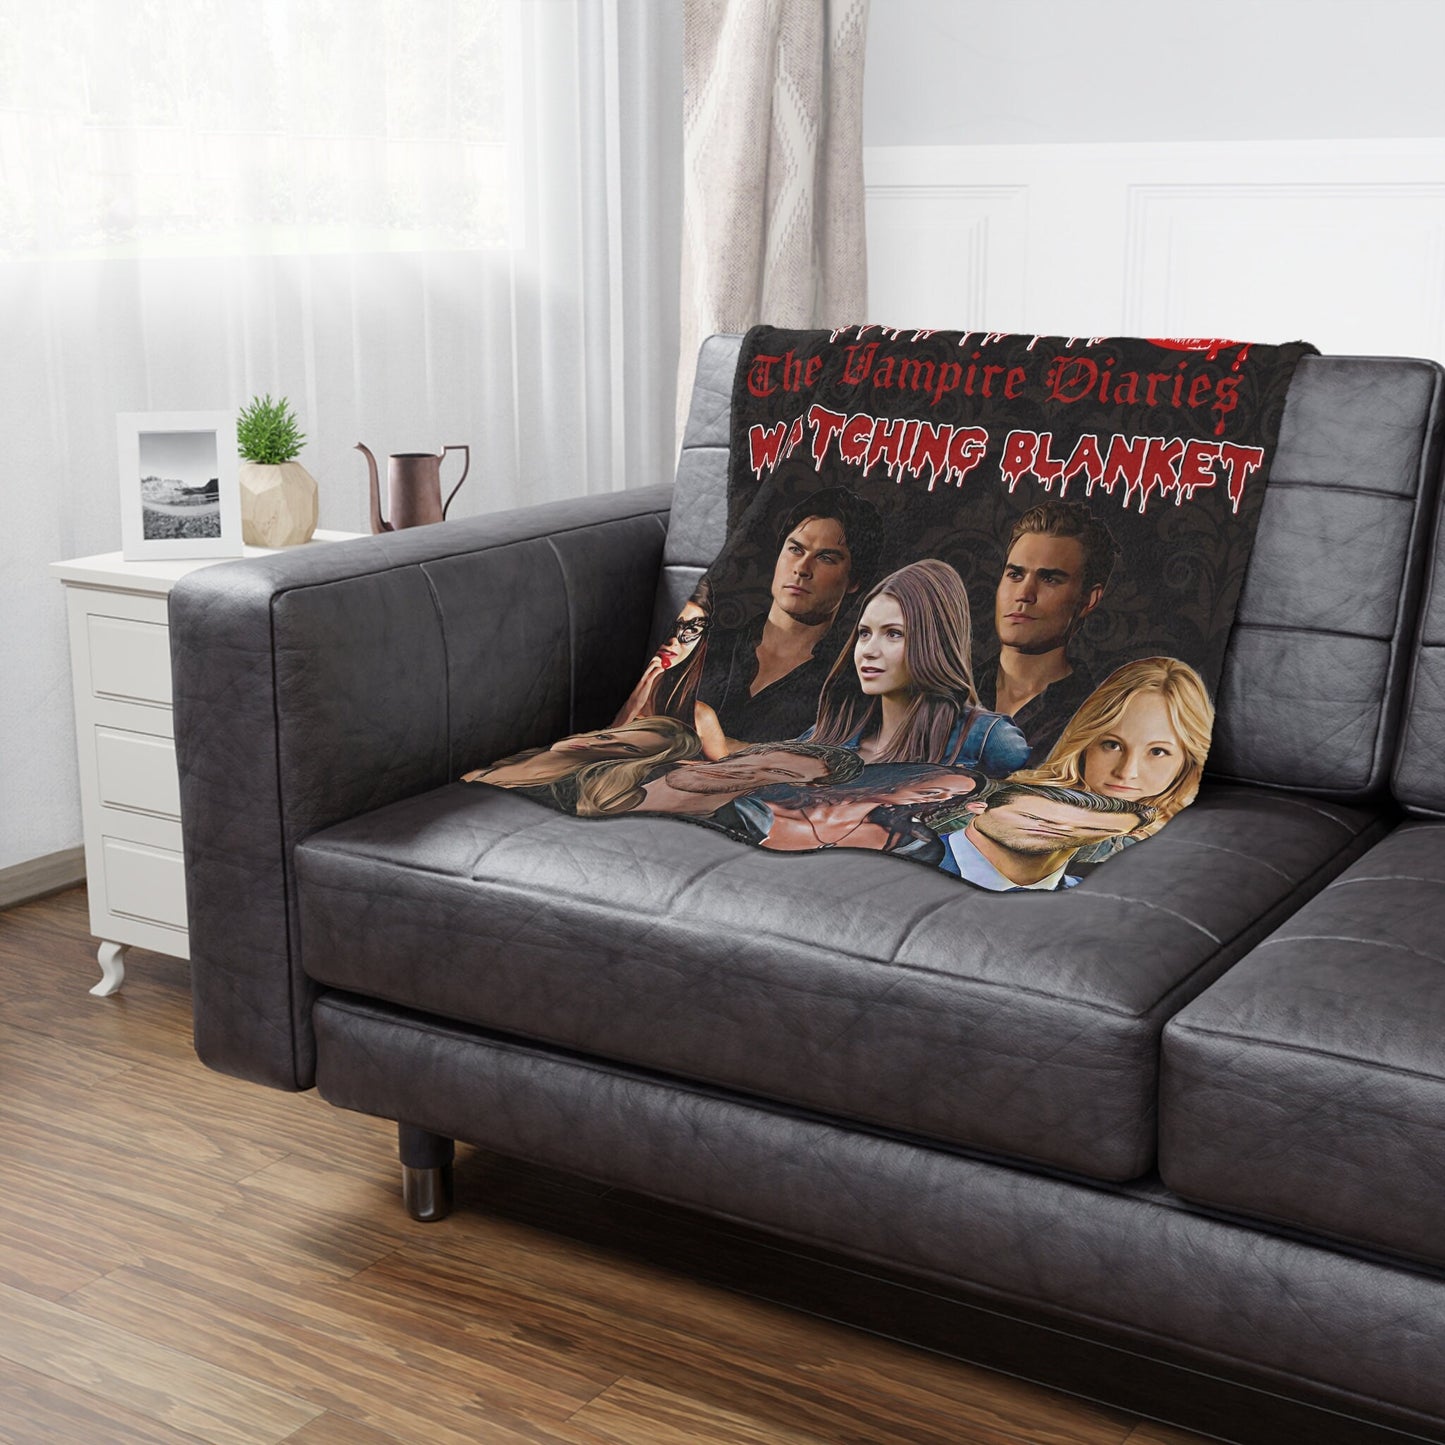 TVD Blanket, This is my TVD watching Blanket, TVD merch, Tvd fan gift, The Vampire diaries, Damon Salvatore blanket, I was feeling epic